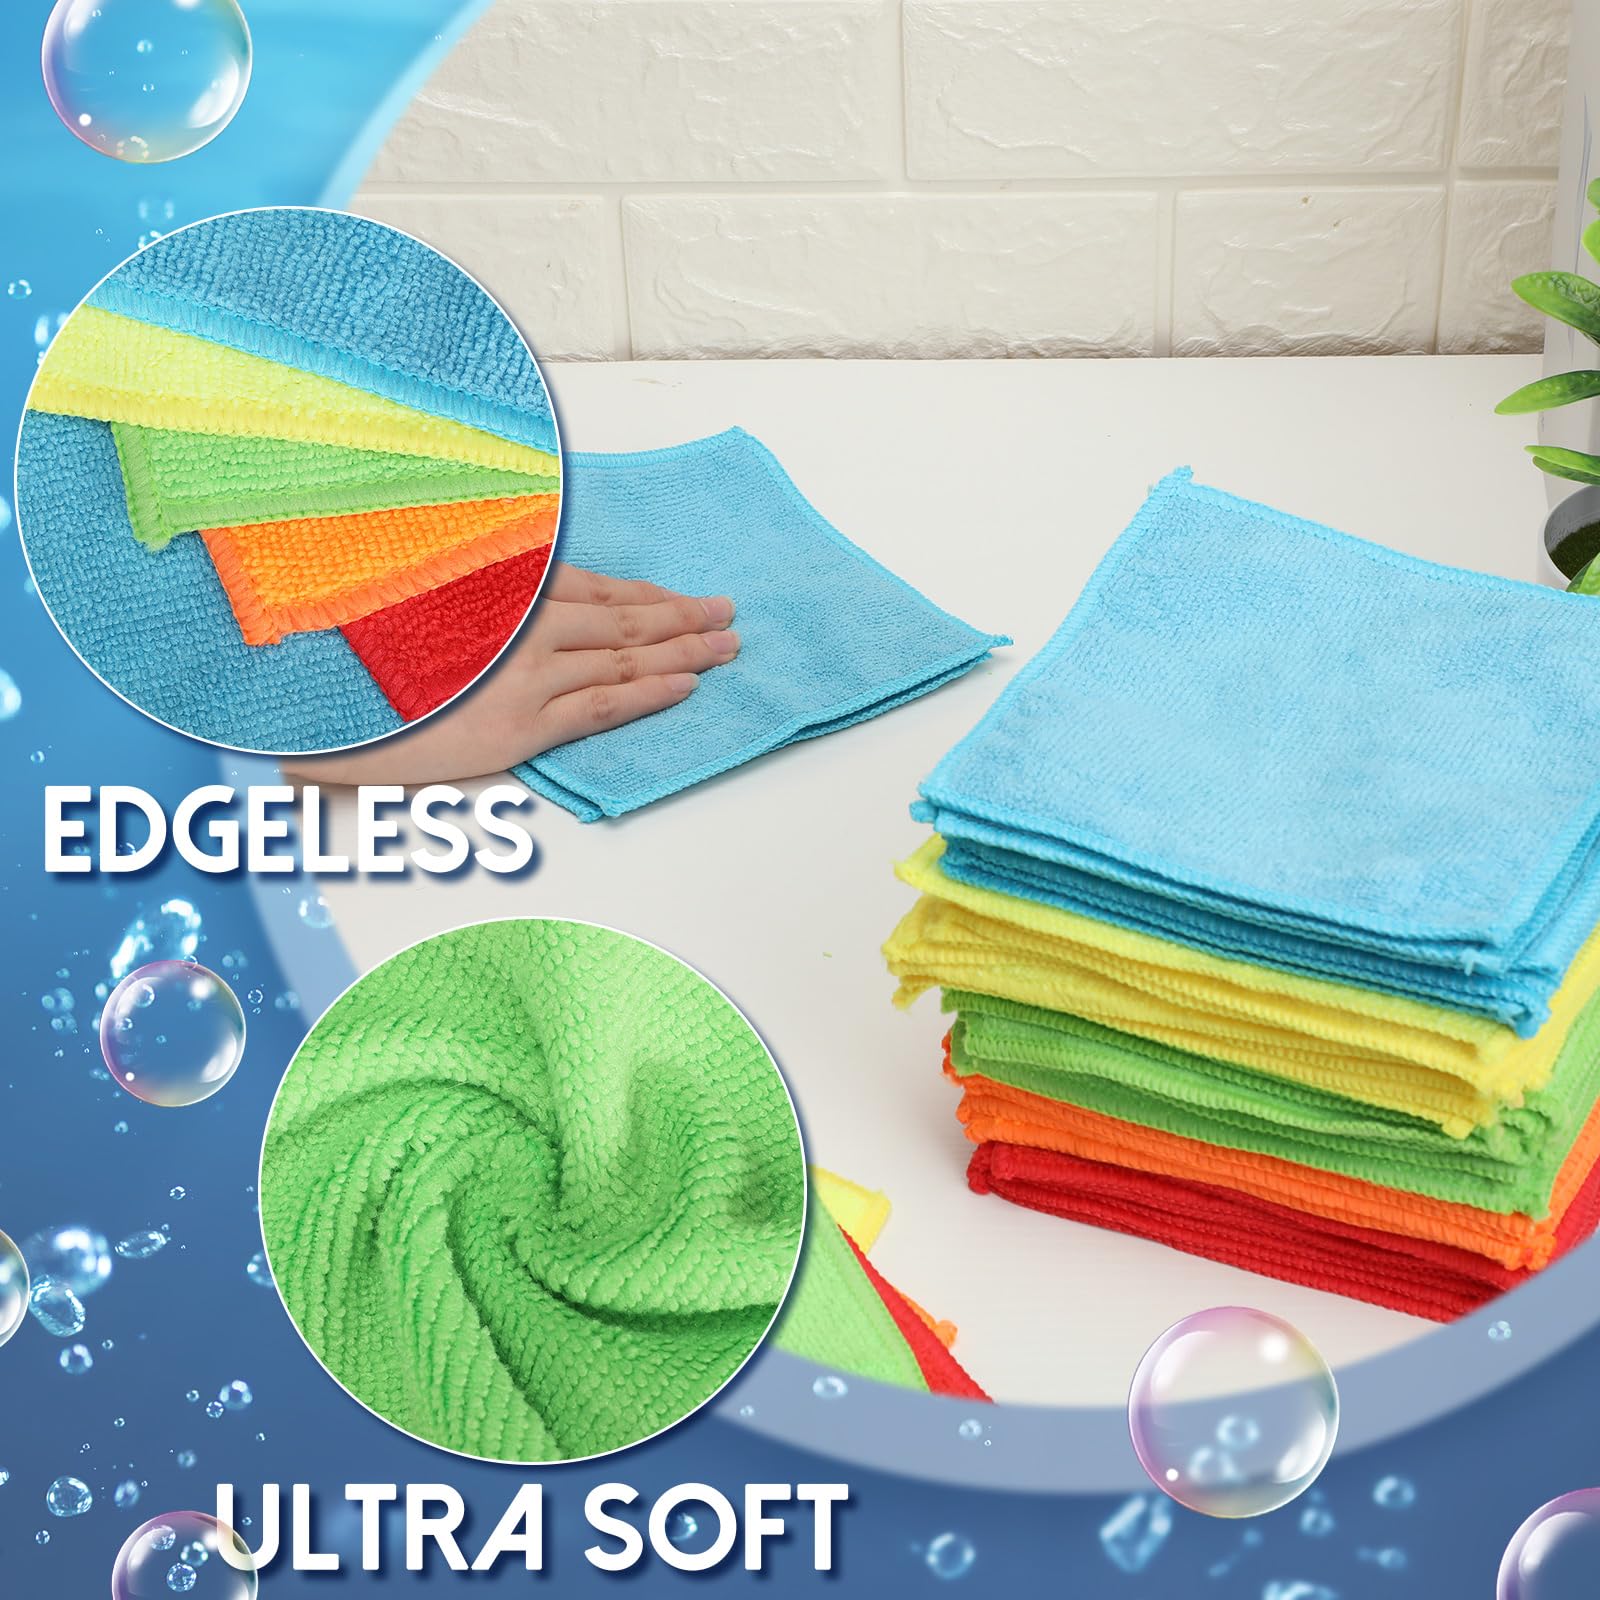 Washing microfiber towels safely